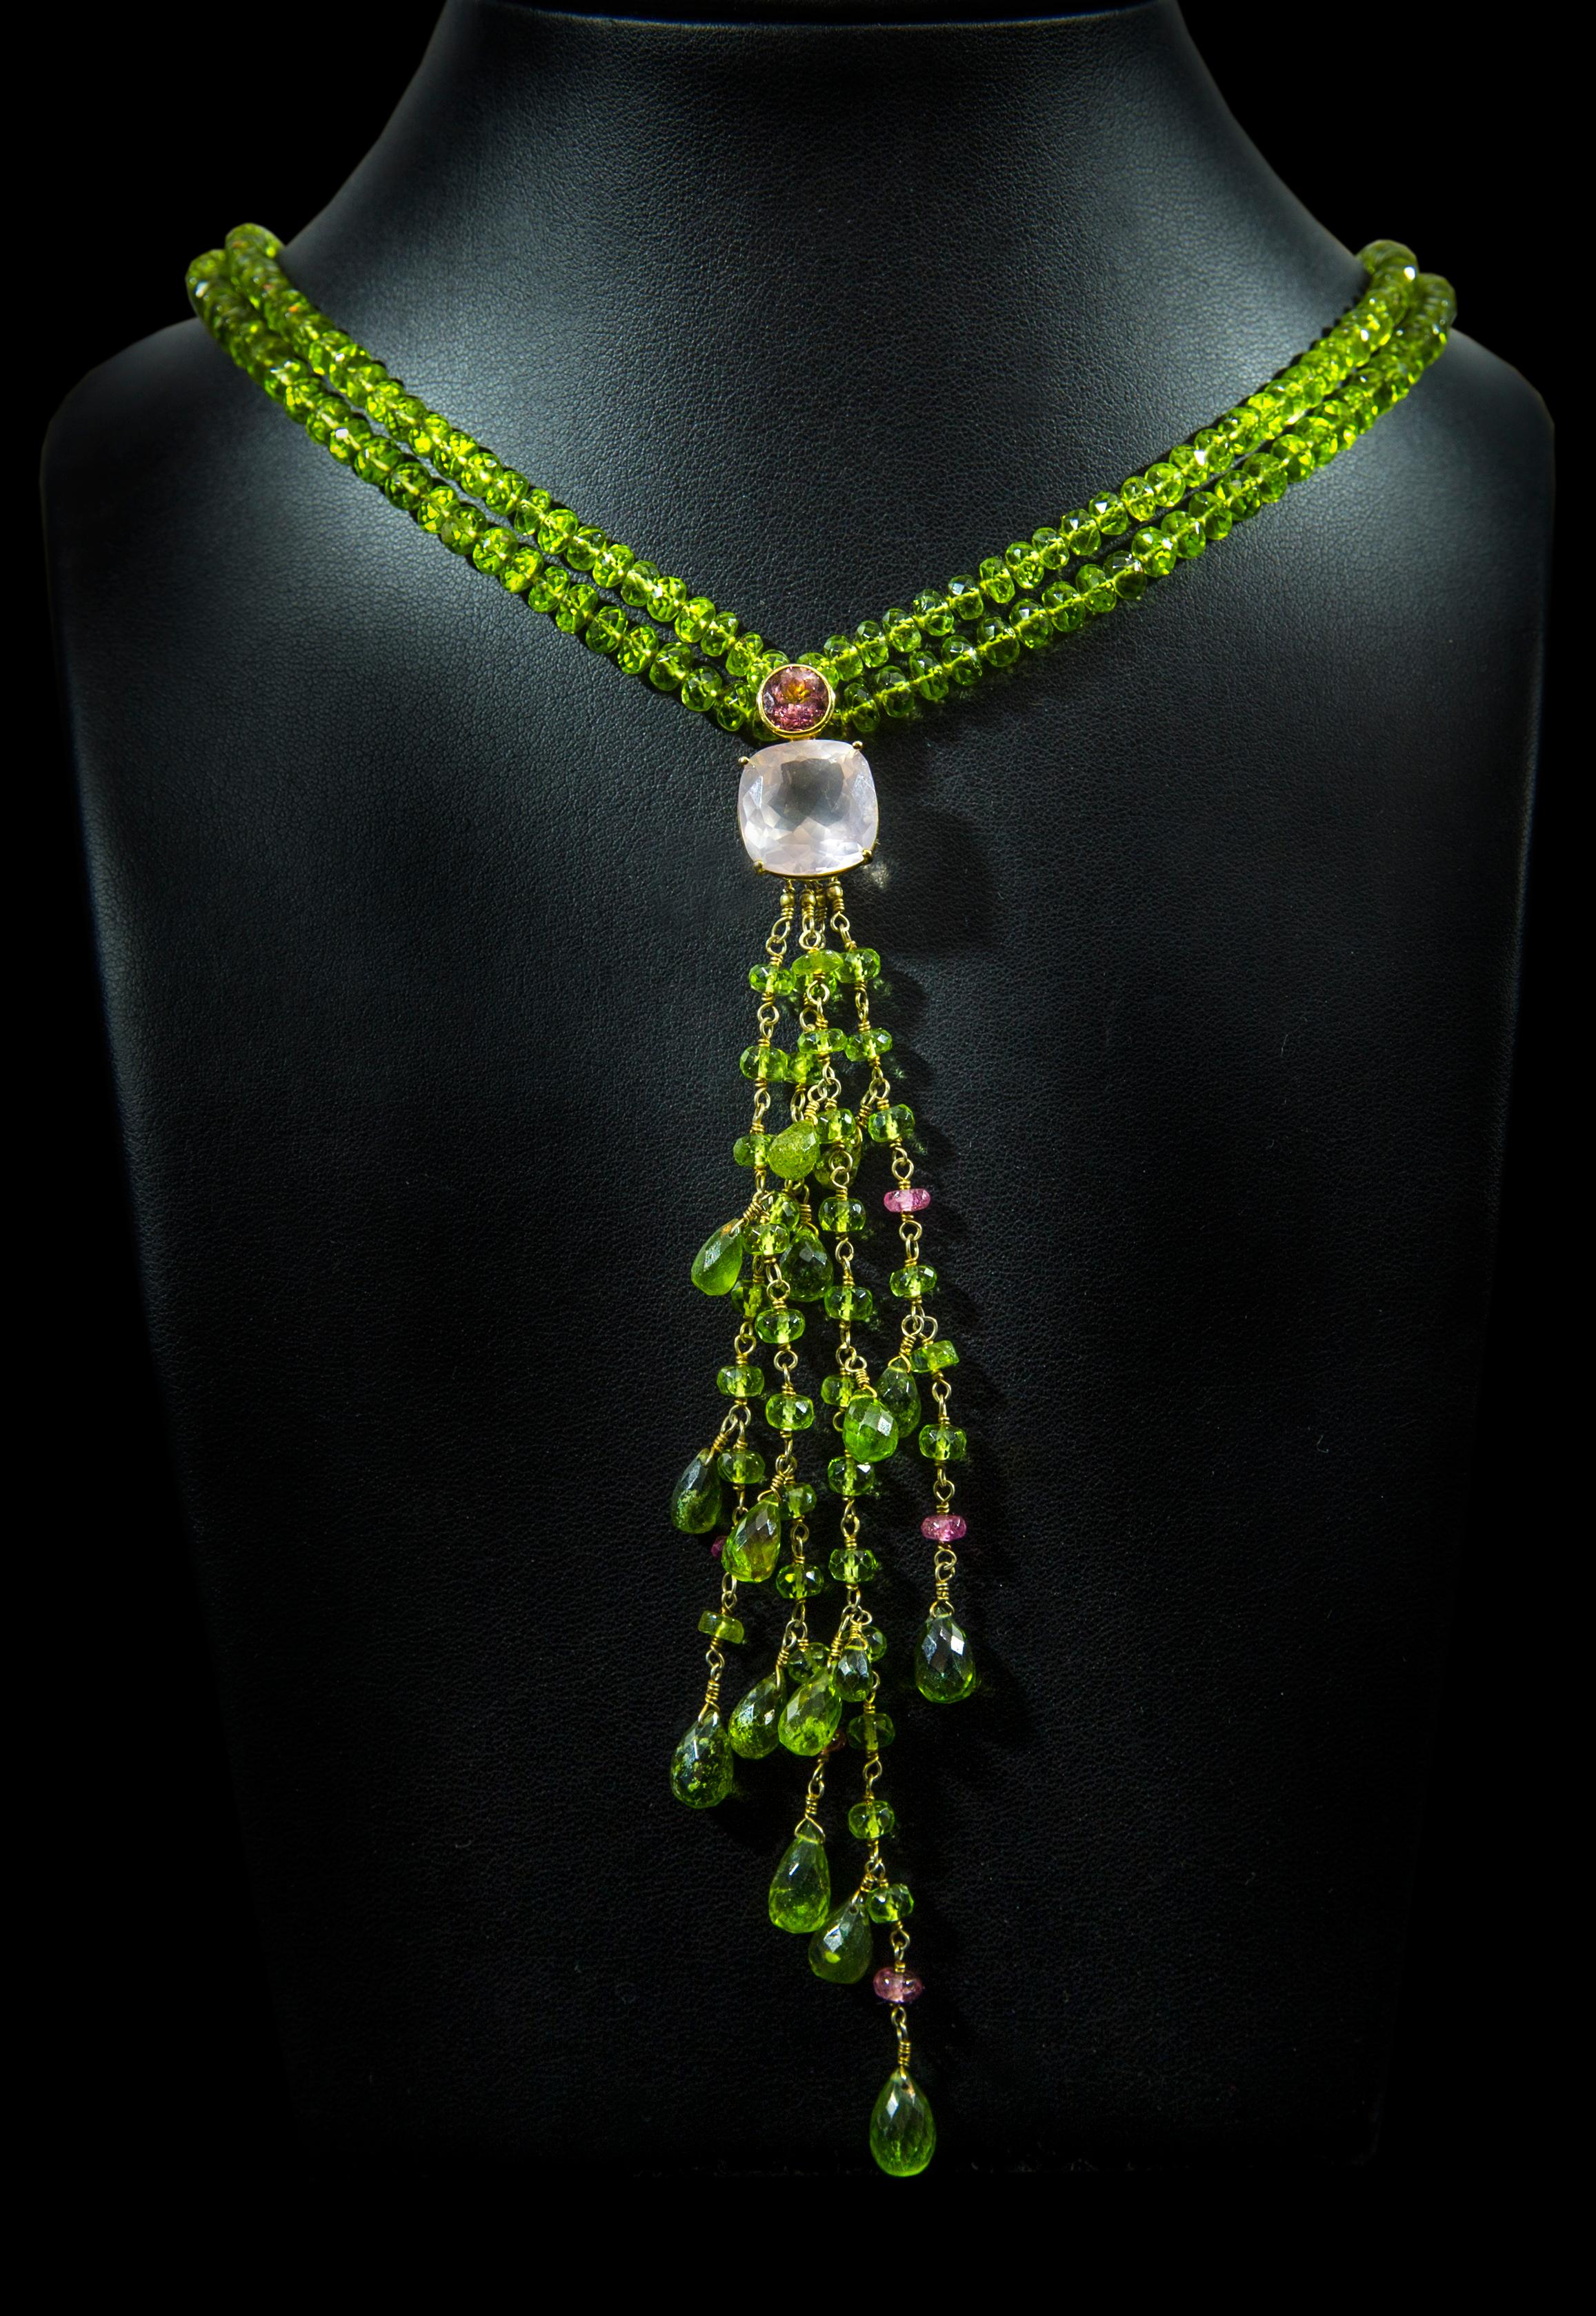 This Jane Magon Collections necklace is from the Warrior Woman Collection and has a Lariat Style with an organic feel. Gem Quality Peridot Beads that come to a Tendril of Peridot, Pink Tourmaline beads with a Round Pink Tourmaline, and a Square